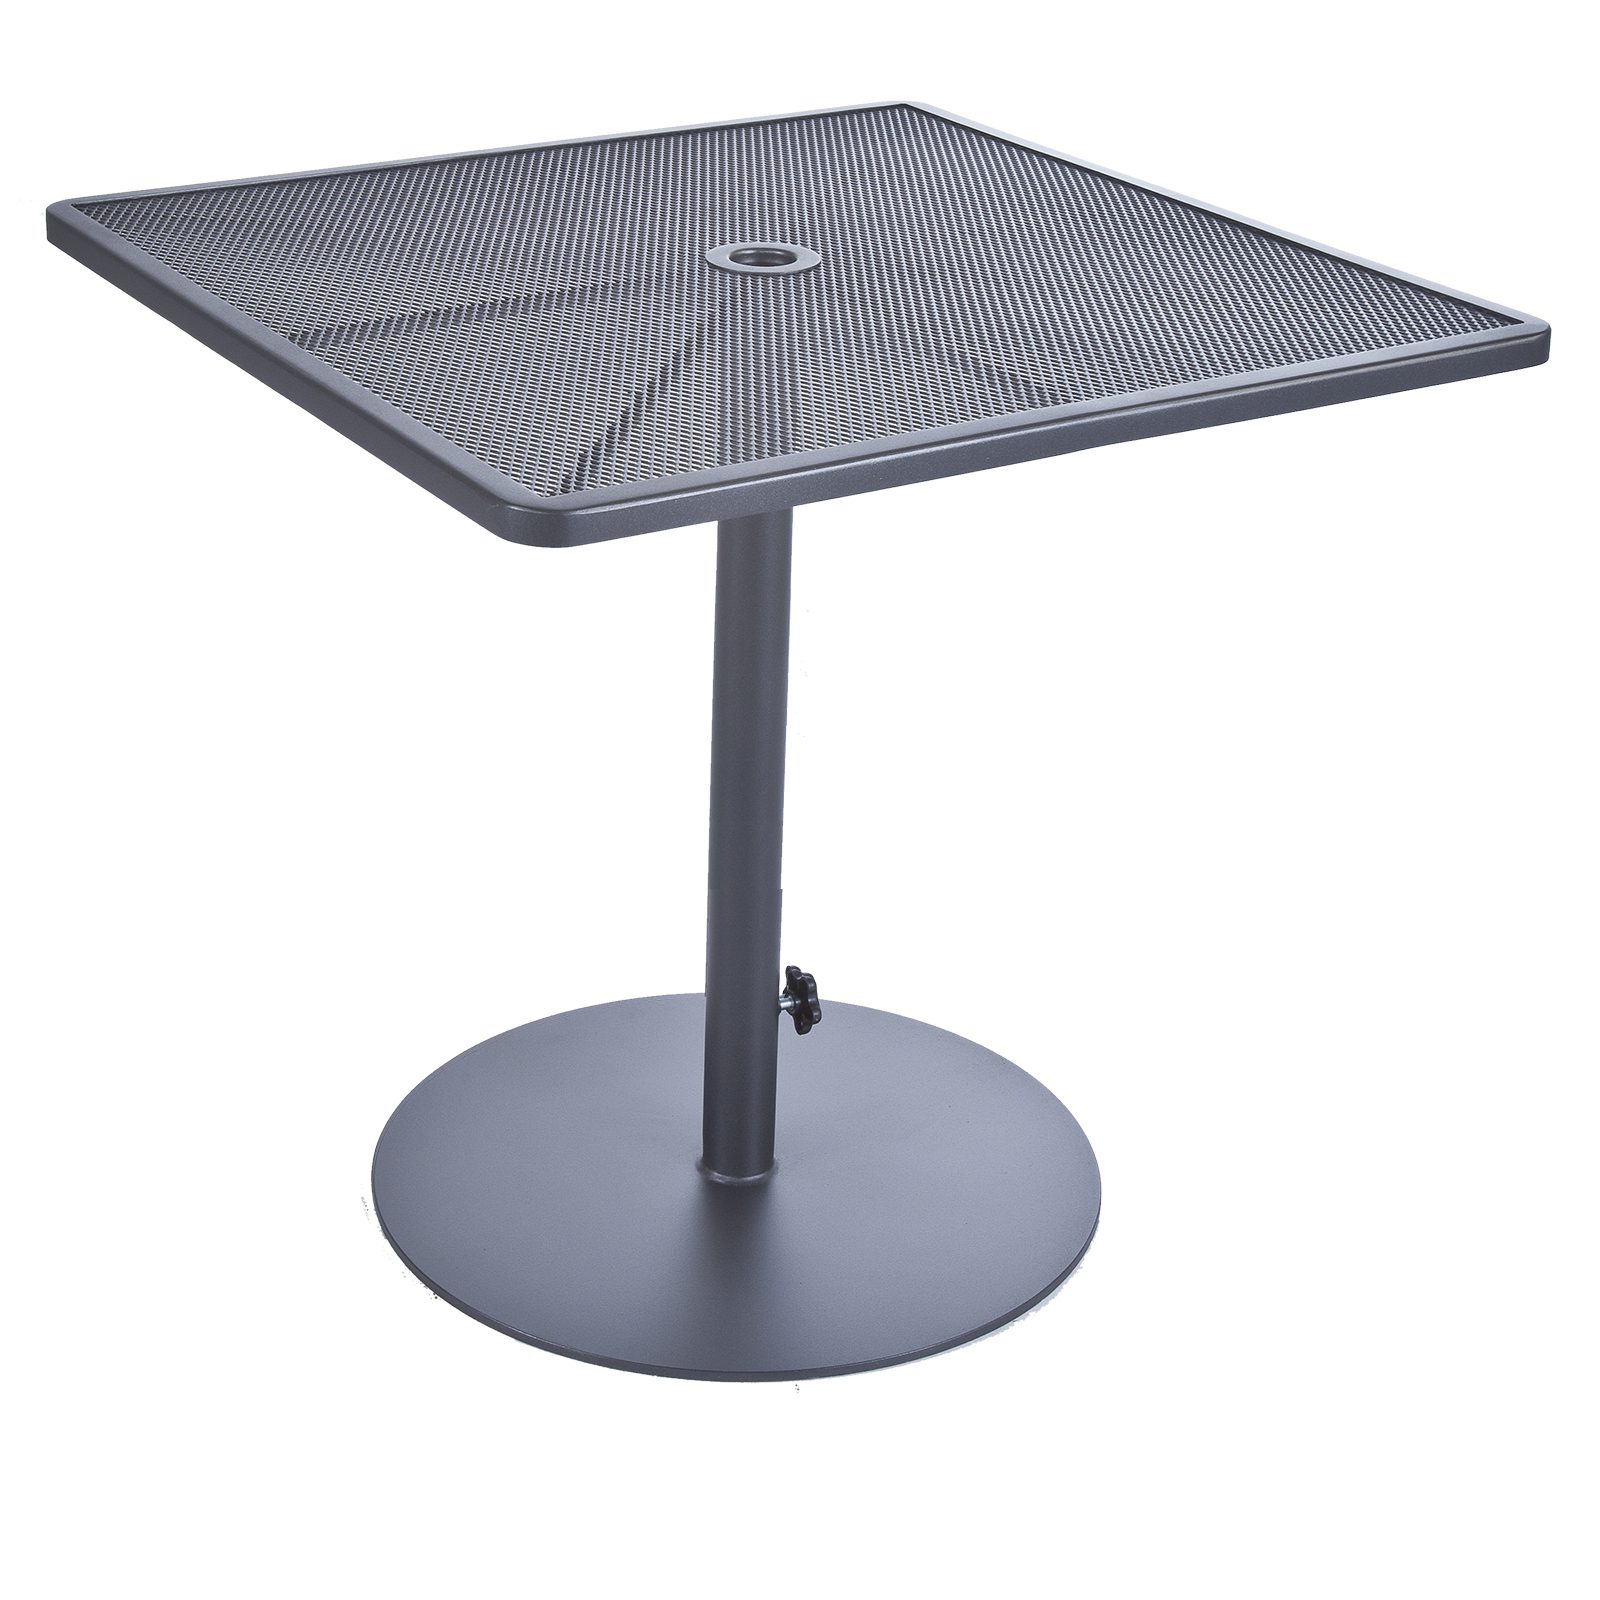 34" Sq. Pedestal Counter Table - Fully Welded Tables - Pedestal Iron Tables 118